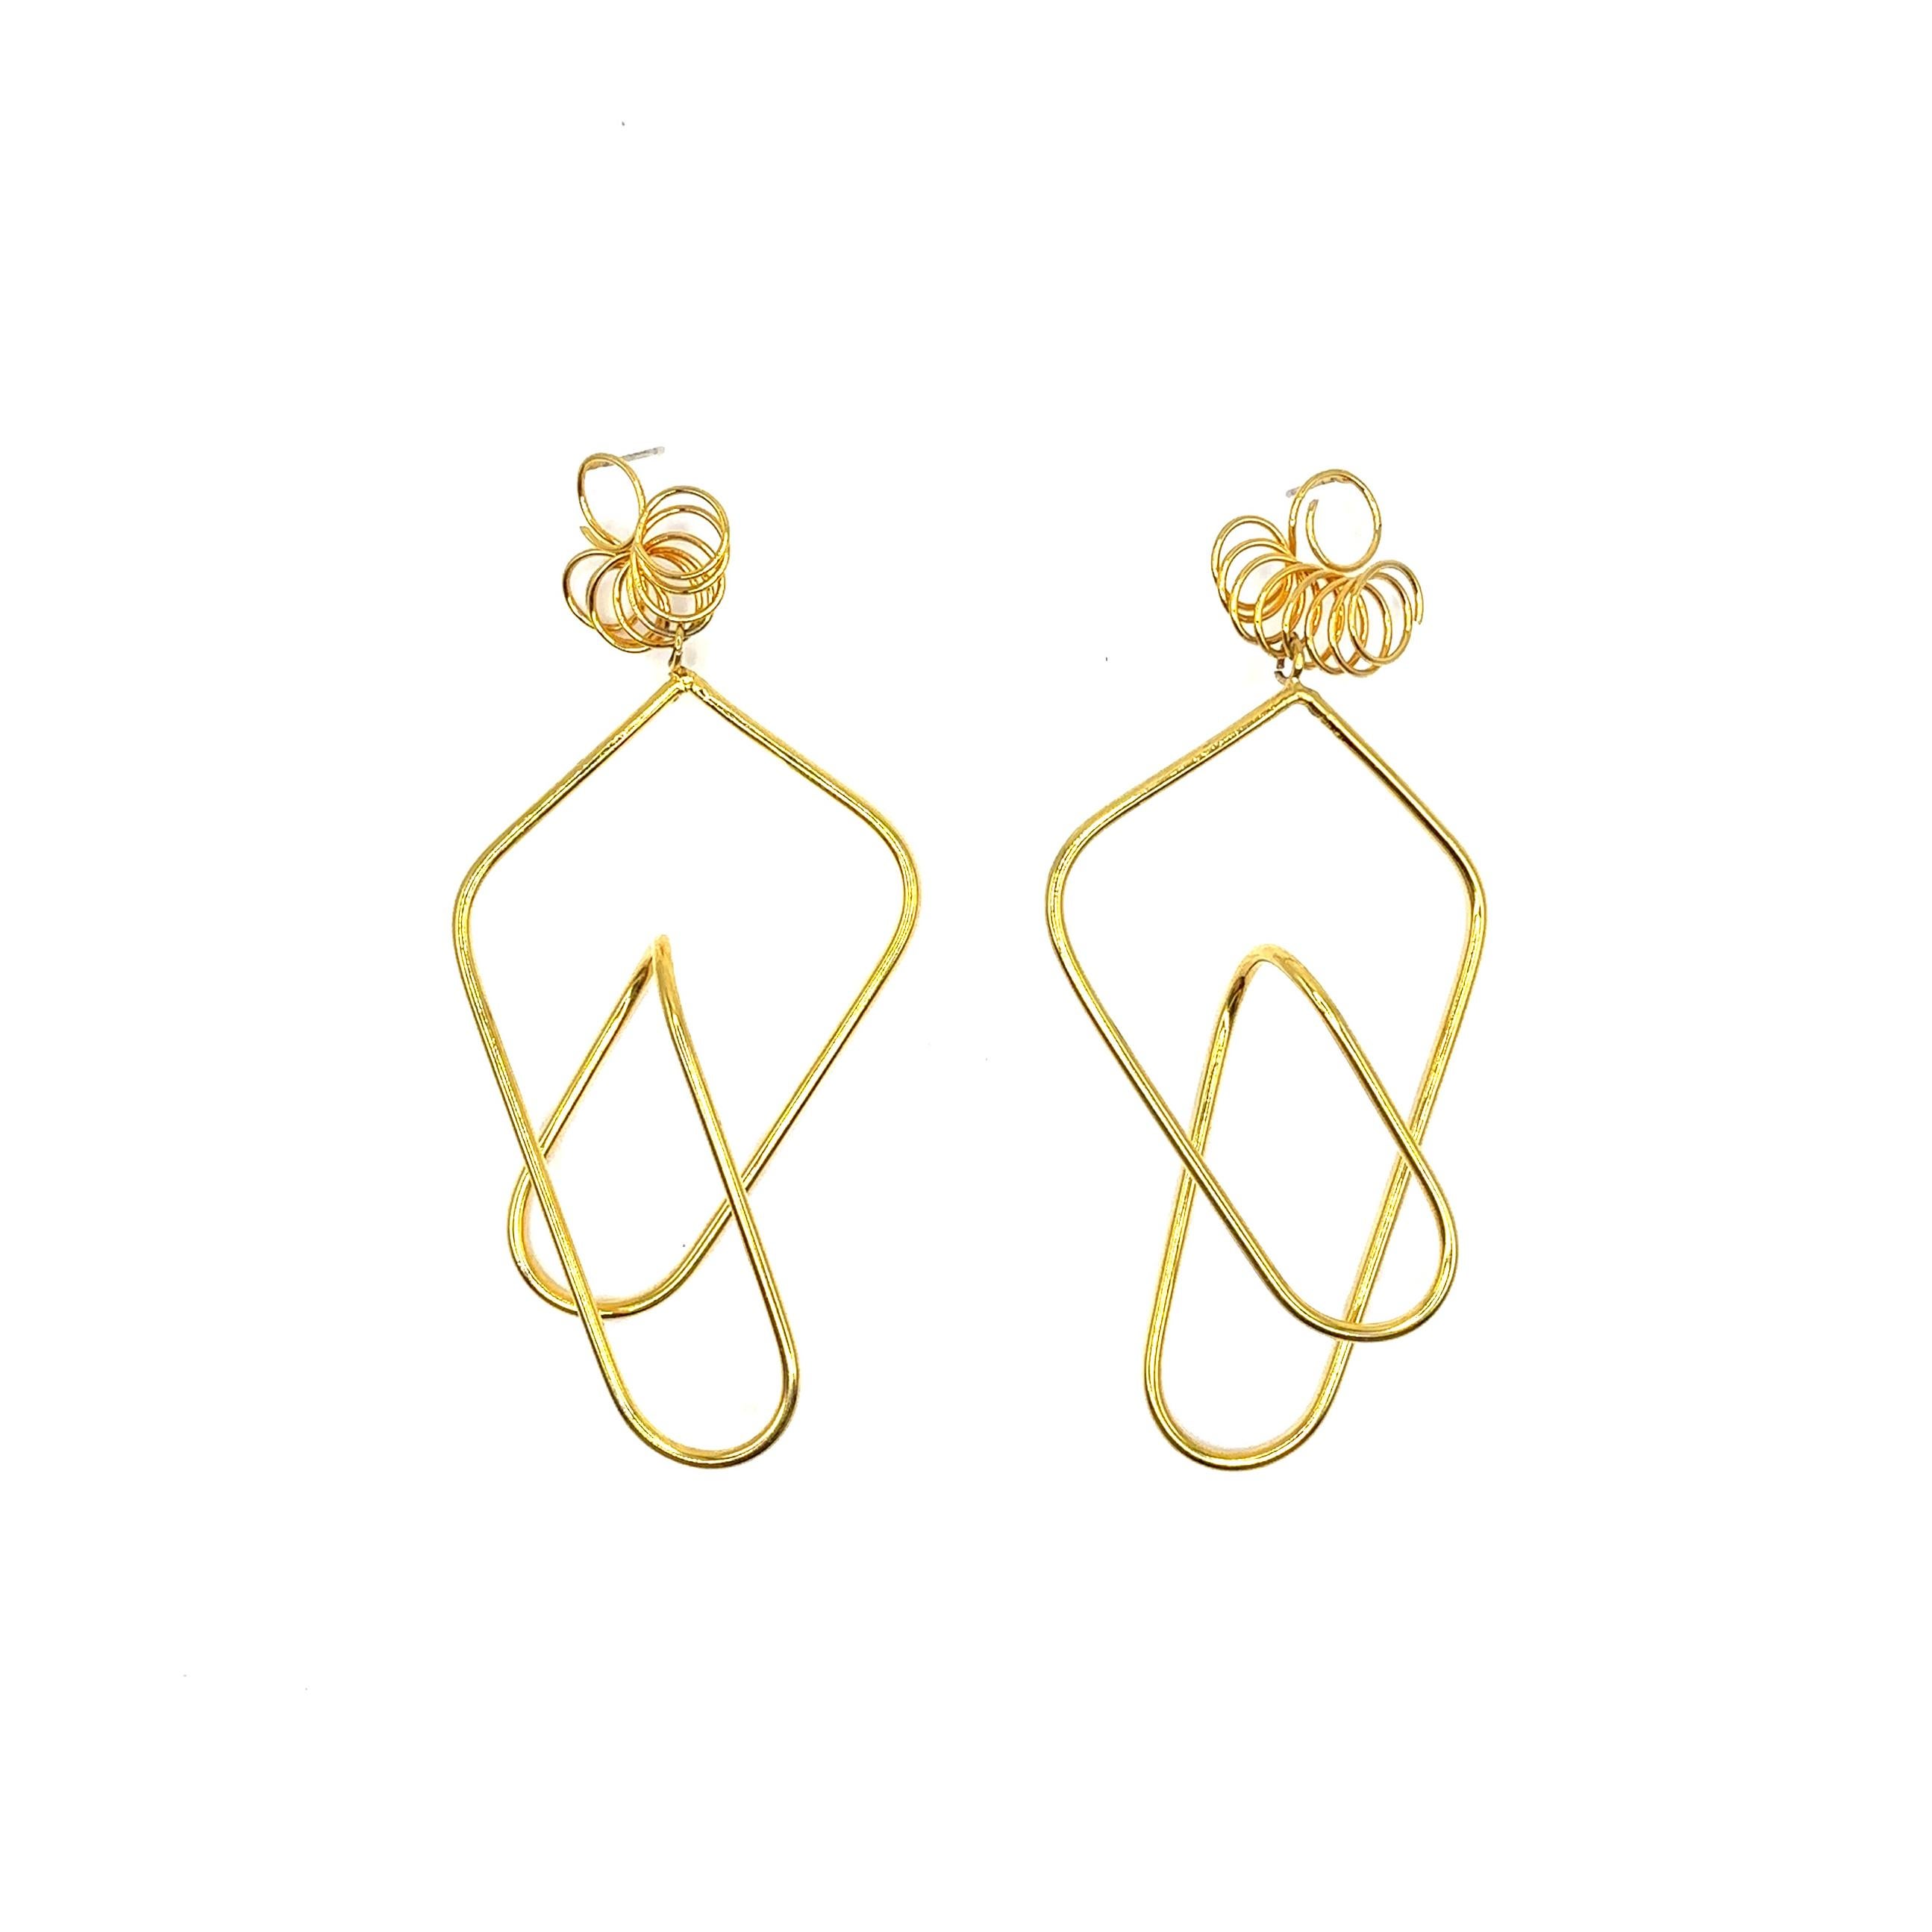 From refined, timeless shapes to modern characters with edge meet LILIYA EARRINGS - handcrafted and shape may vary slightly making pieces one of a kind. Available in different finishes.